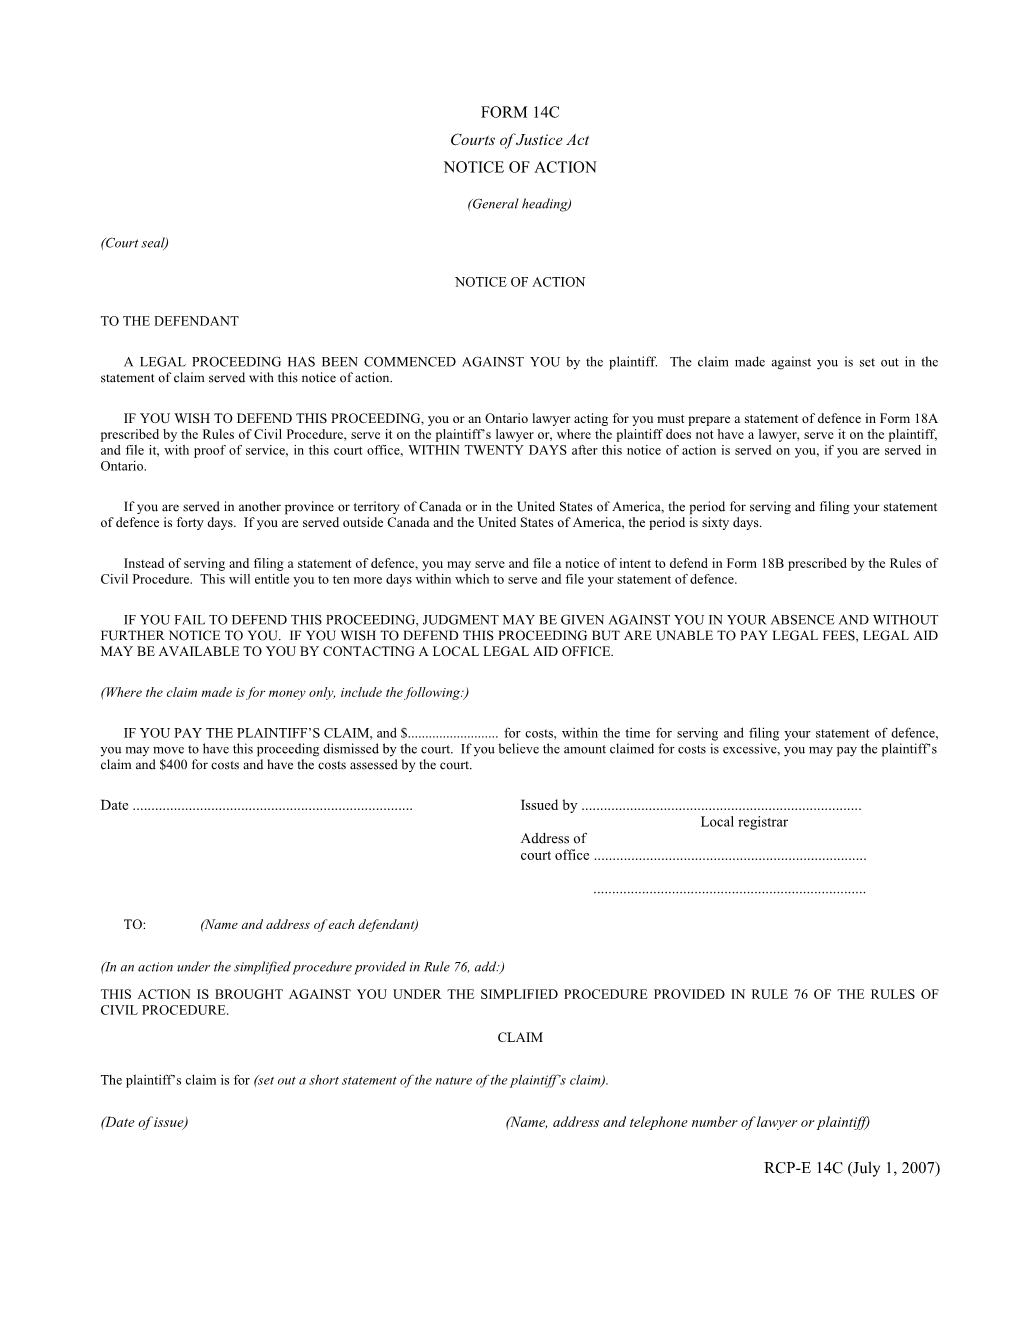 Form 14C Notice of Action